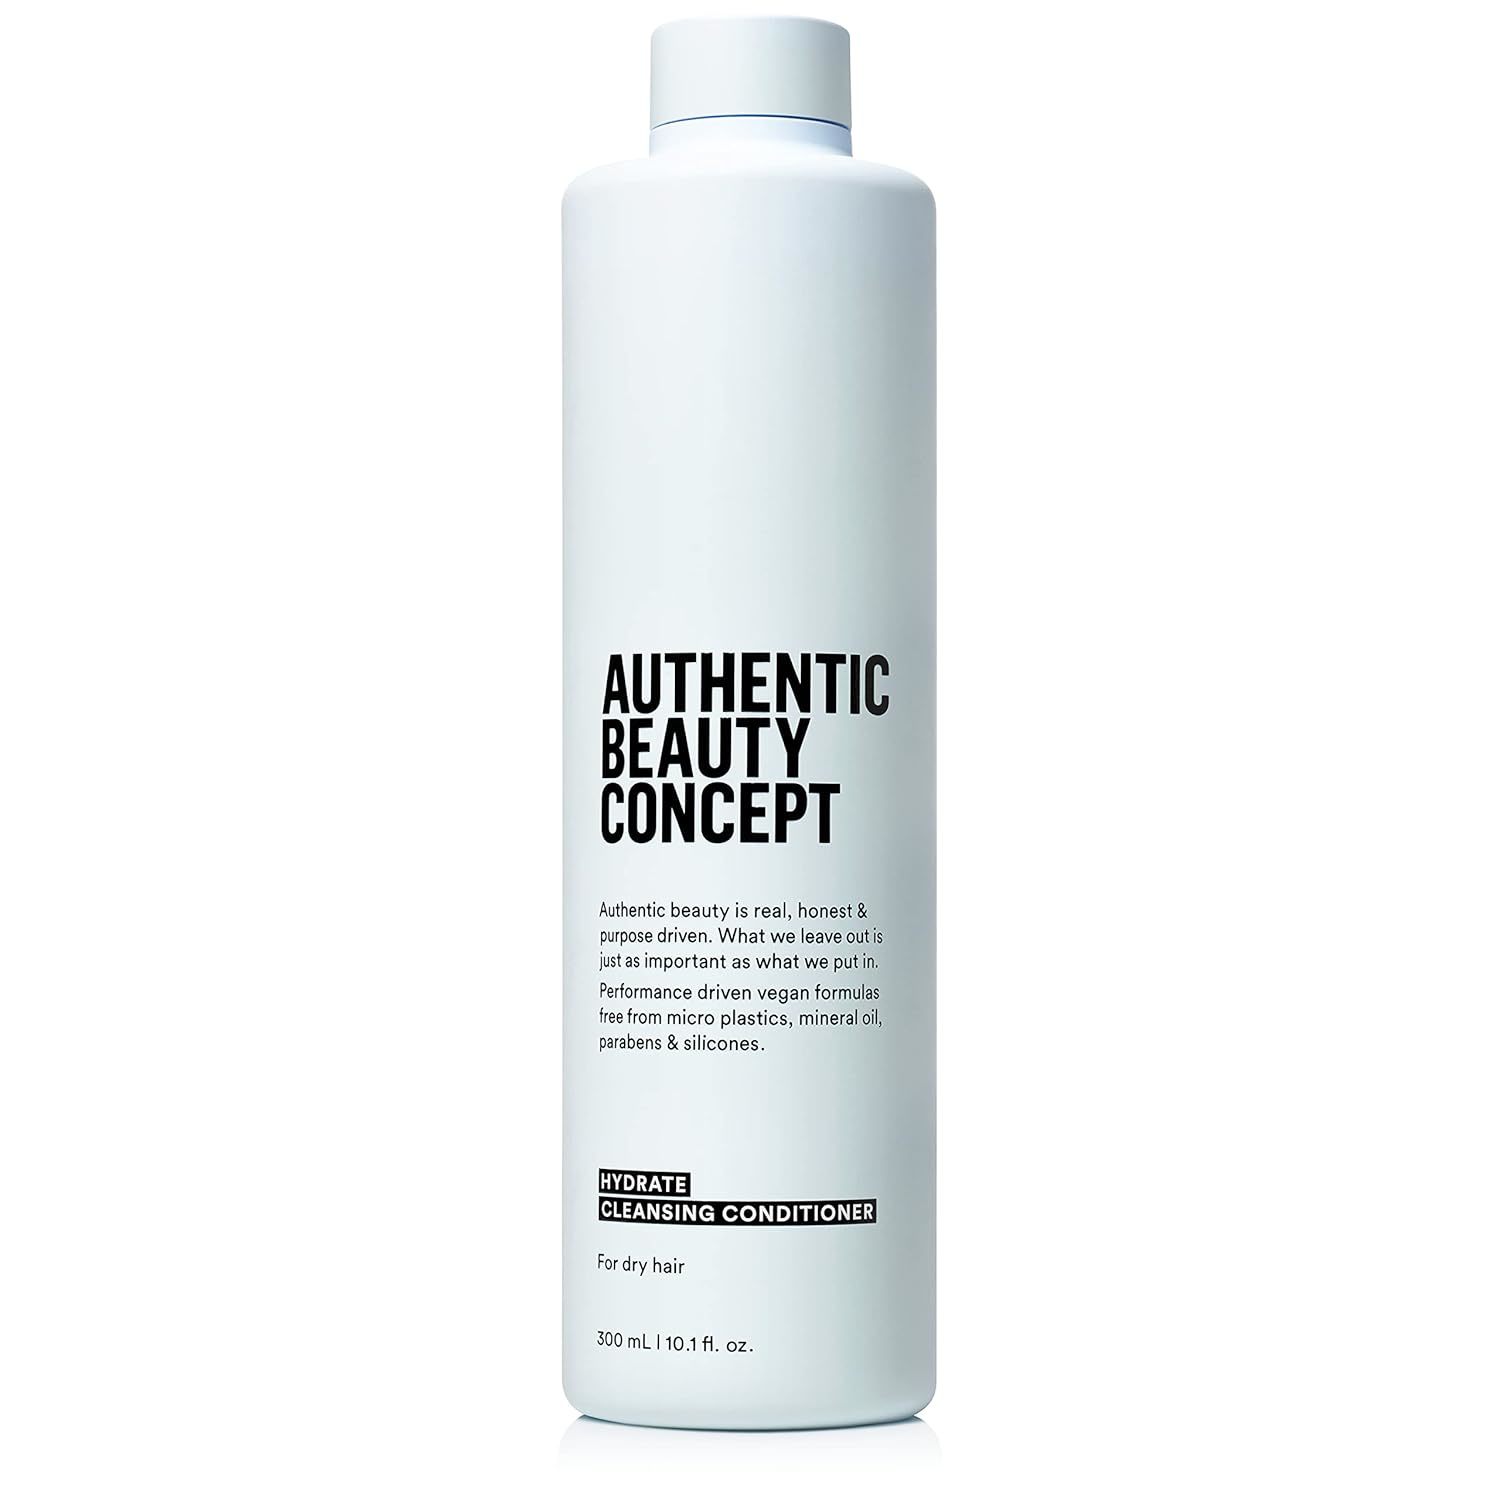 Primary image for Authentic Beauty Concept Hydrate Cleansing Conditioner 10.1oz